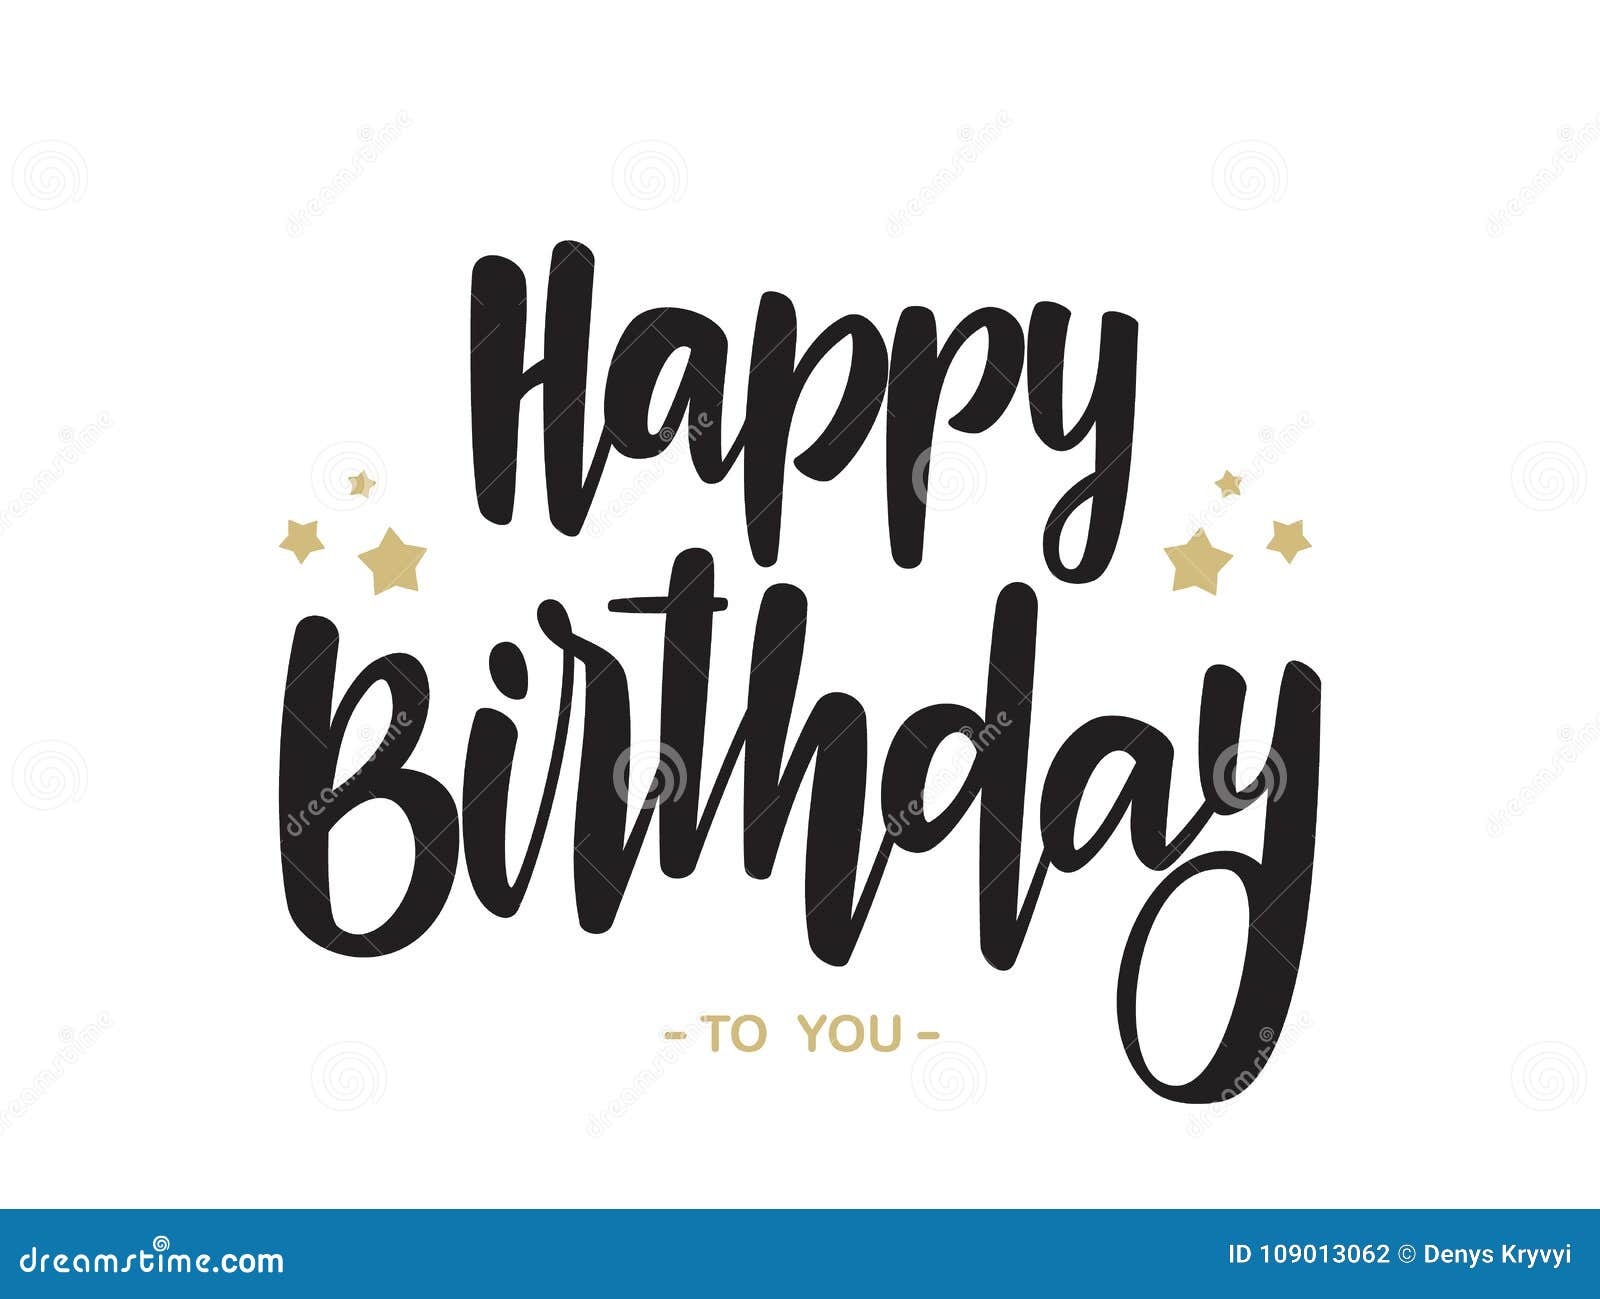 Handwritten Type Lettering Of Happy Birthday To You On White Background Typography Design Greetings Card Stock Vector Illustration Of Abstract Black 109013062 With tenor, maker of gif keyboard, add popular happy birthday animated gifs to your conversations. https www dreamstime com vector illustration handwritten type lettering happy birthday to you white background typography design greetings card image109013062